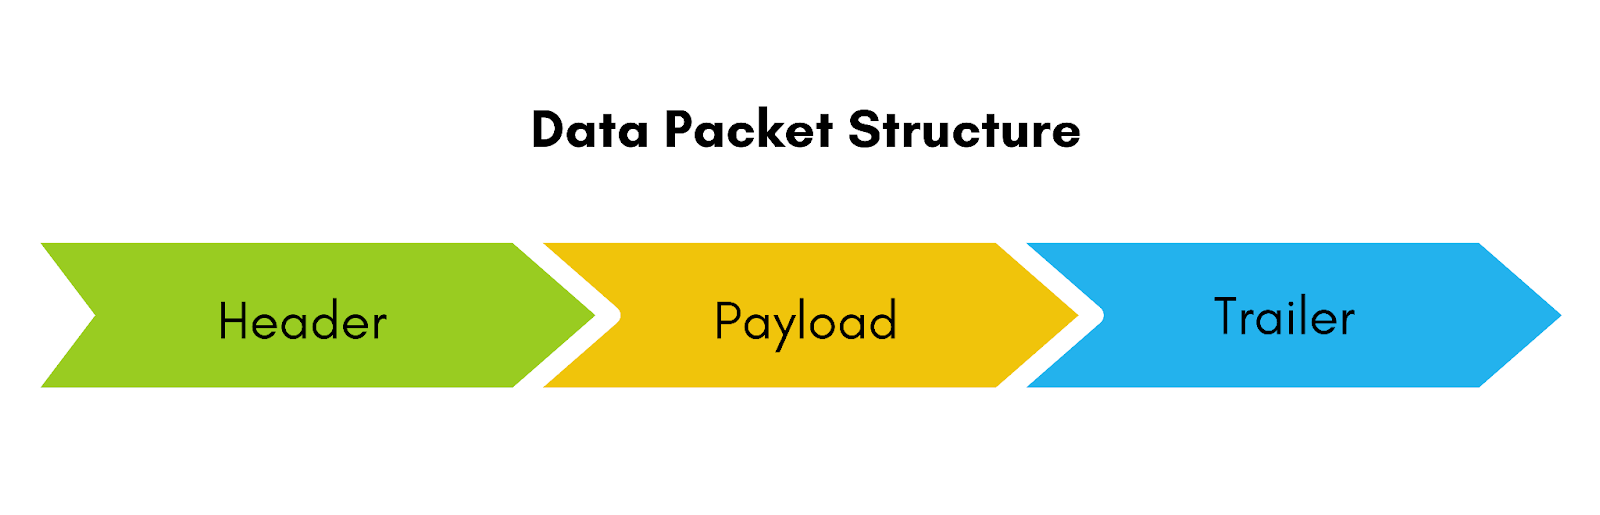 data packet structure